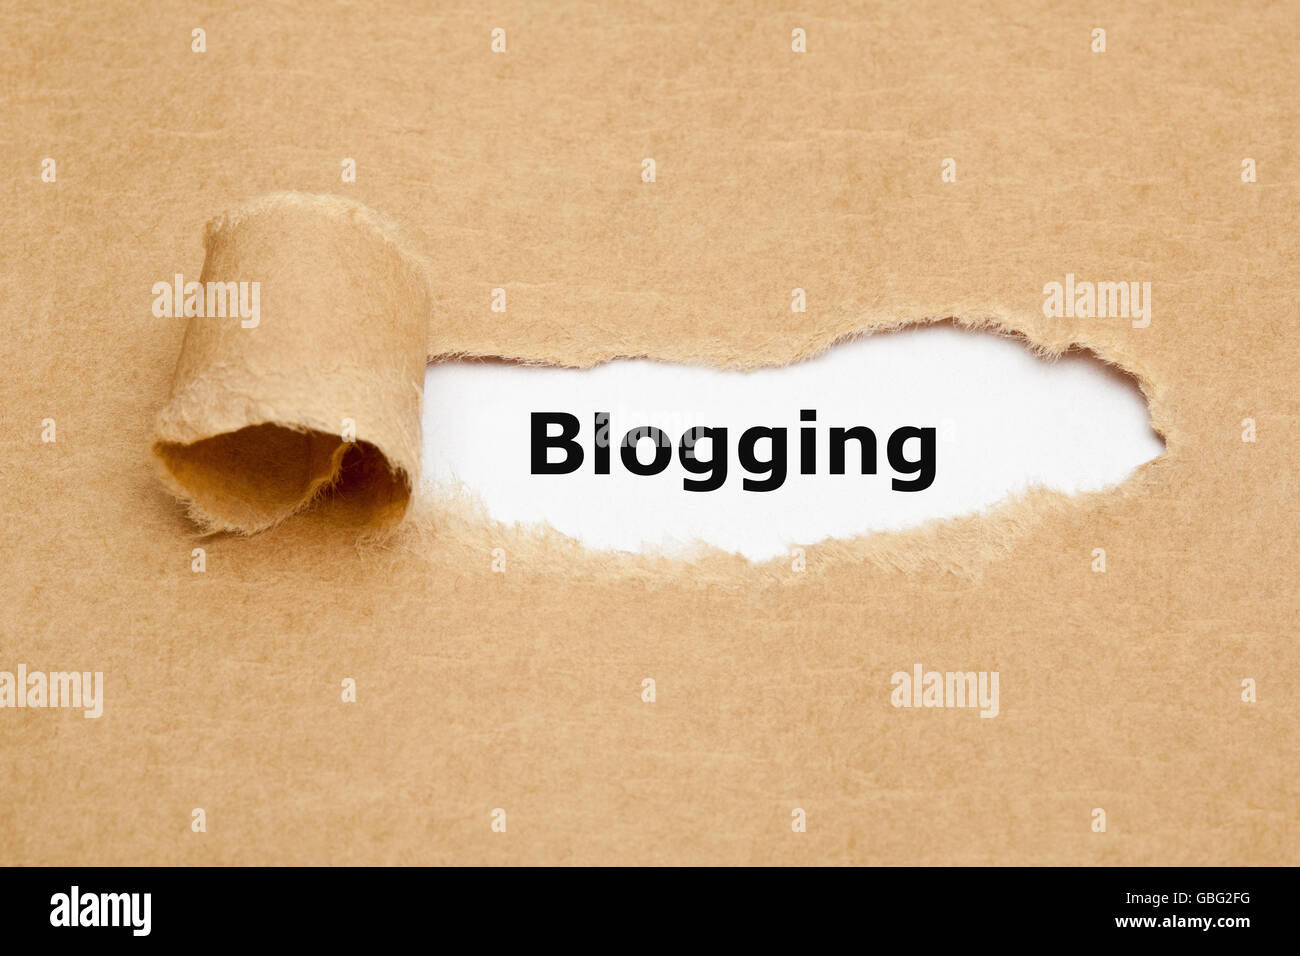 The word Blogging appearing behind ripped brown paper. Stock Photo